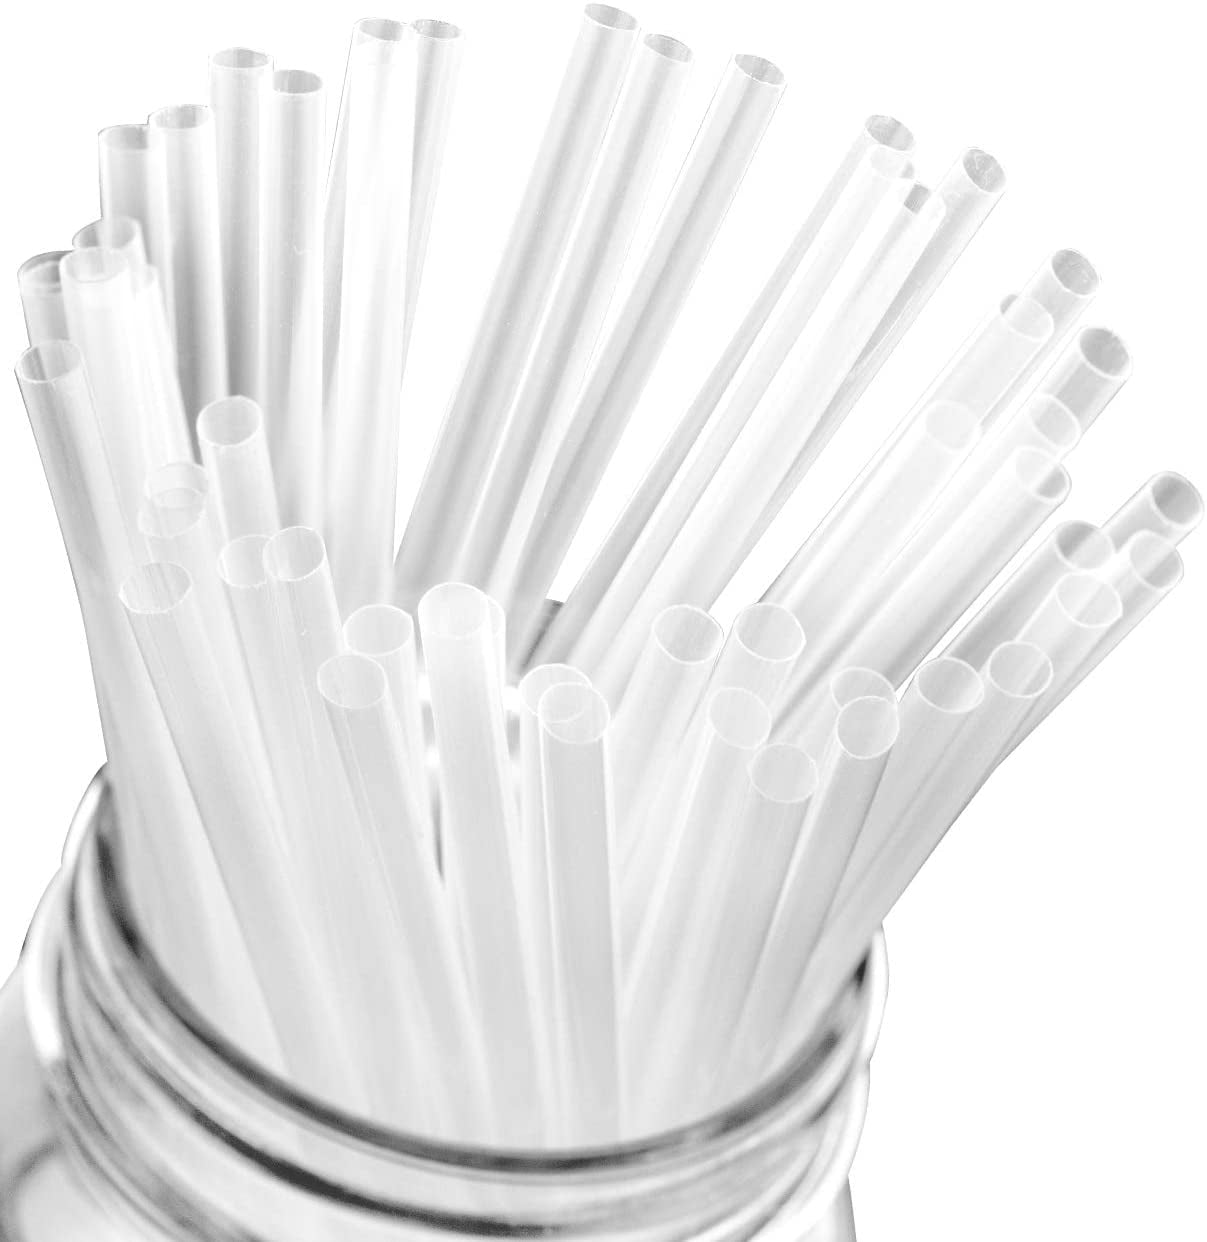 Individually Wrapped  7.75 Inches Clear Plastic Drinking Straws 500 Pack 